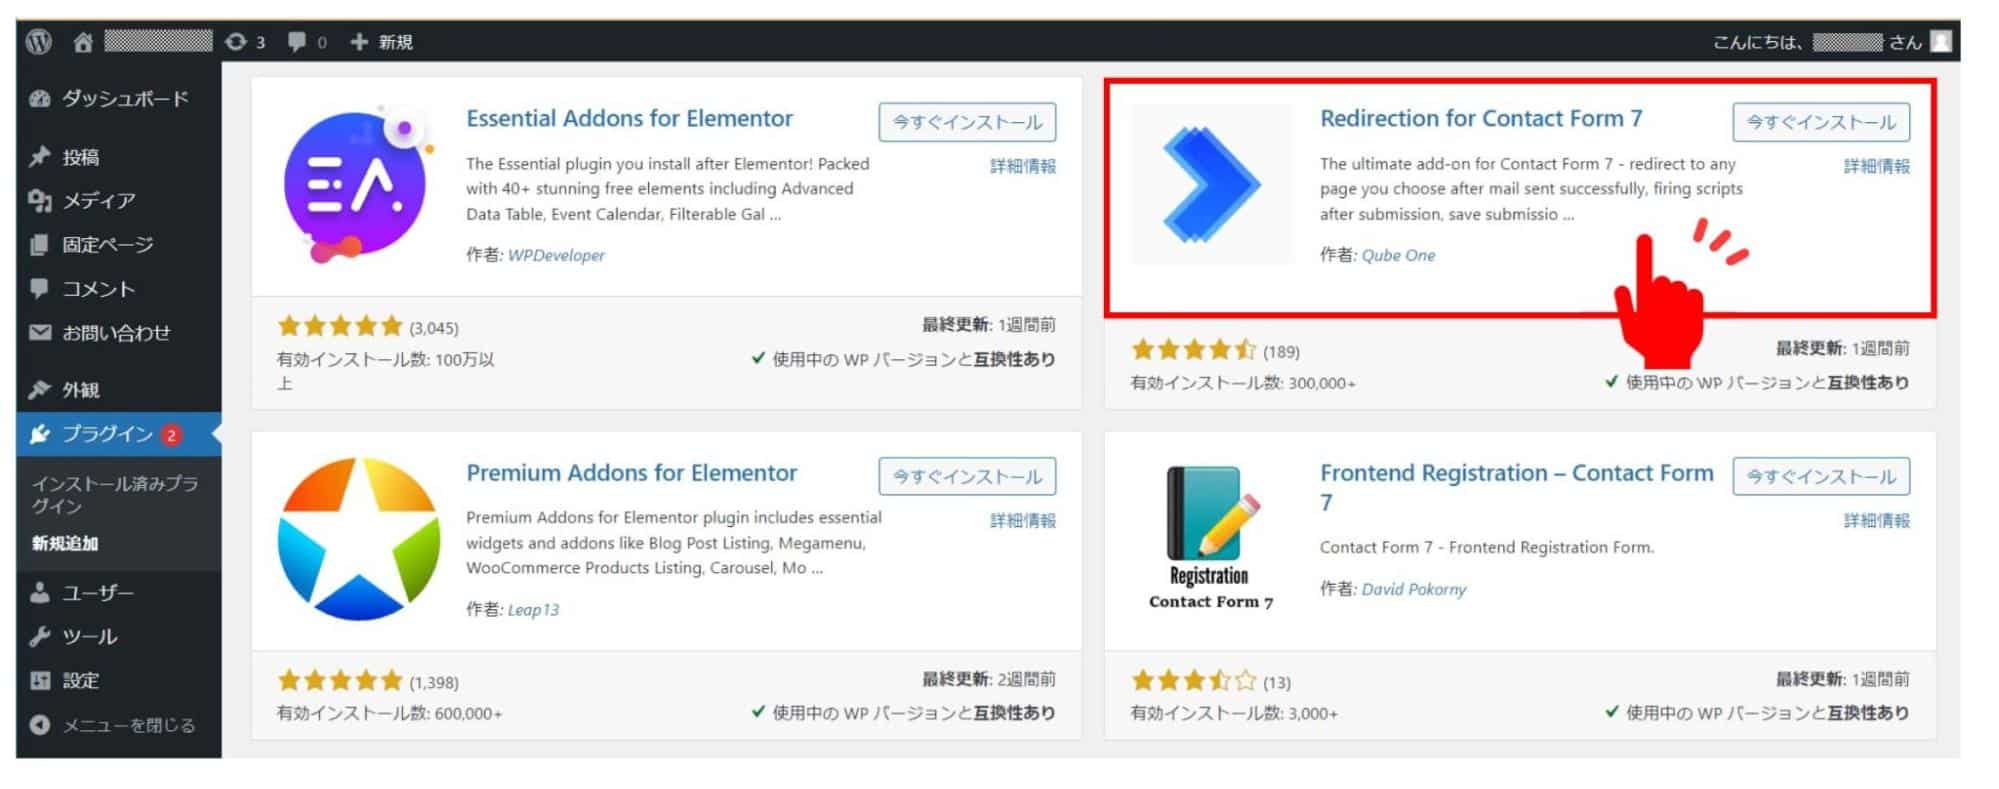 「Redirection for Contact Form 7」を利用する